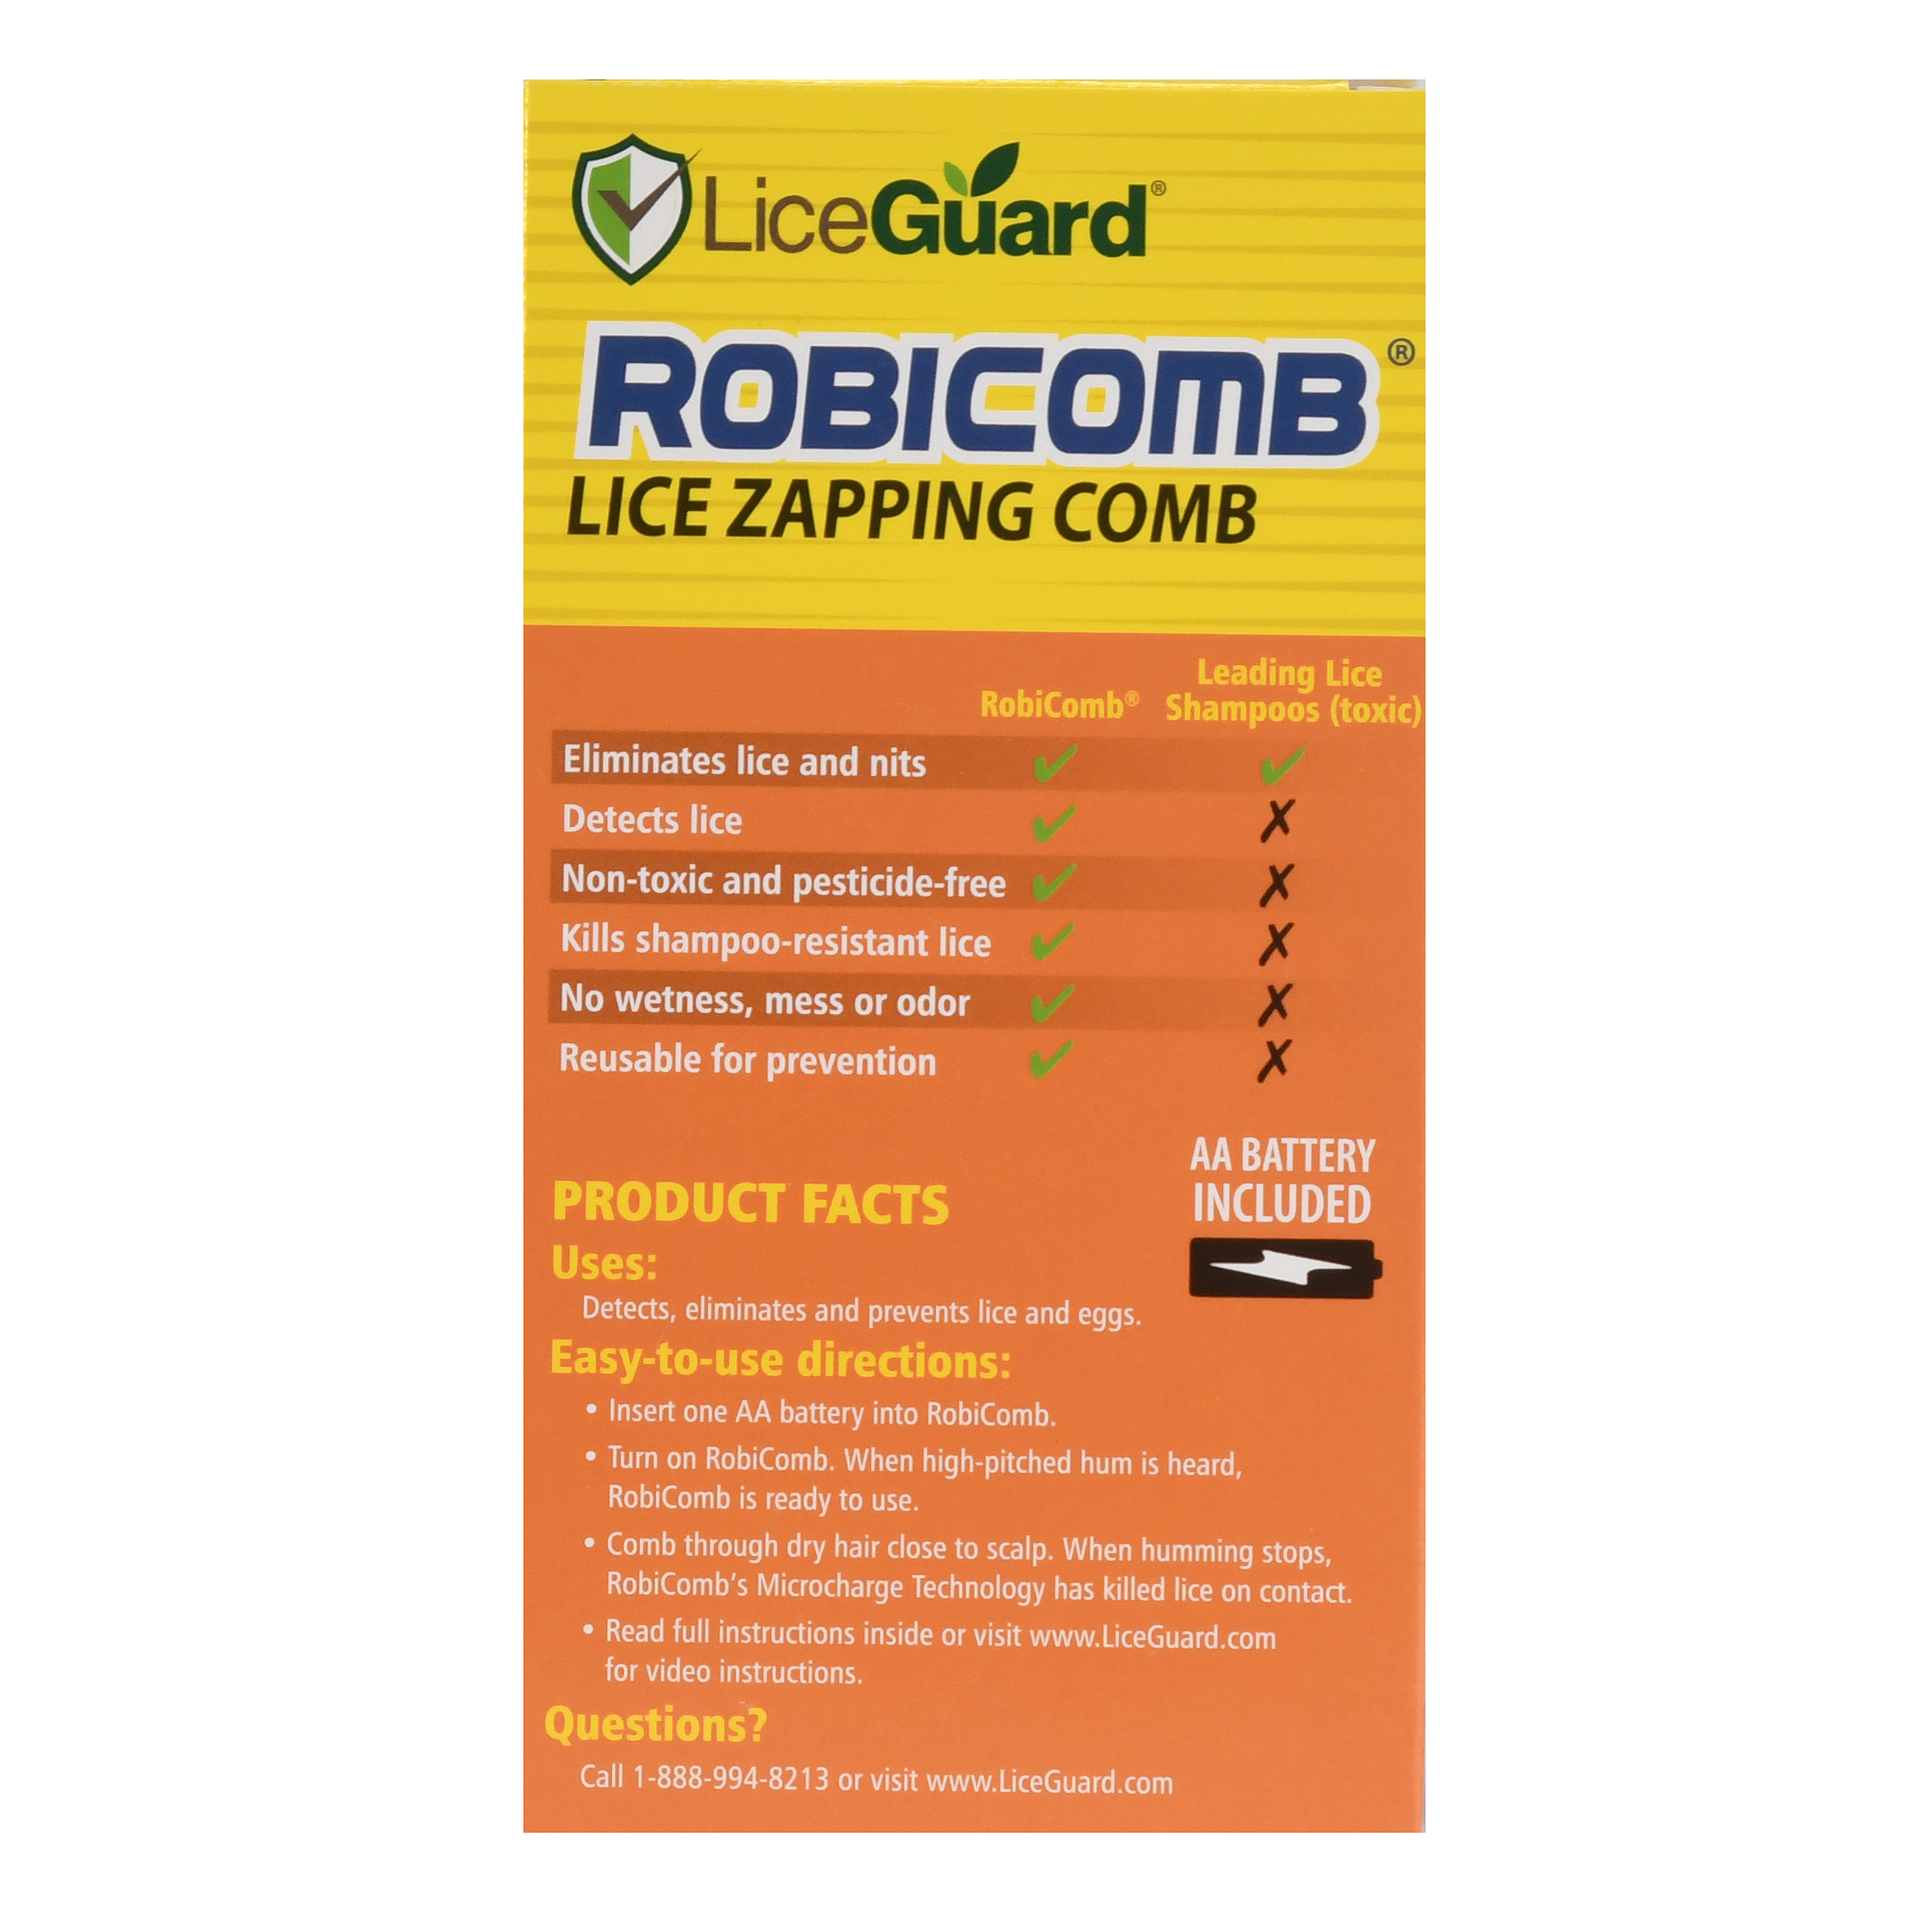 LiceGuard RobiComb Lice Zapping Comb - image 2 of 7